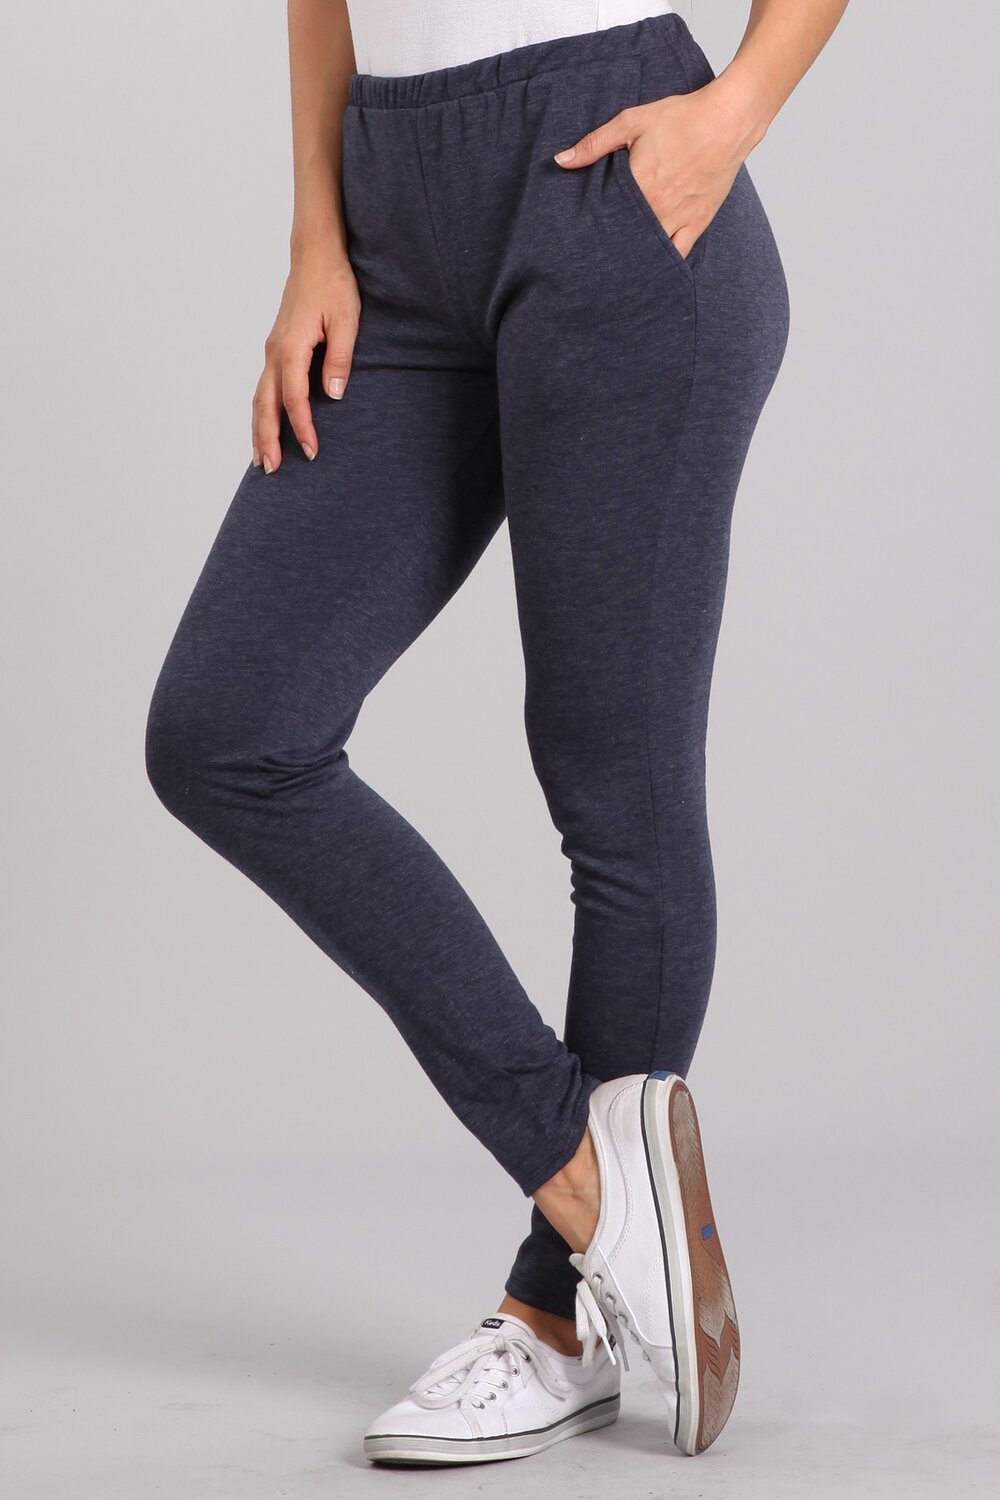 Knit Jeggings with Side Pockets (S, 2X, 3X) — South Blvd Boutique